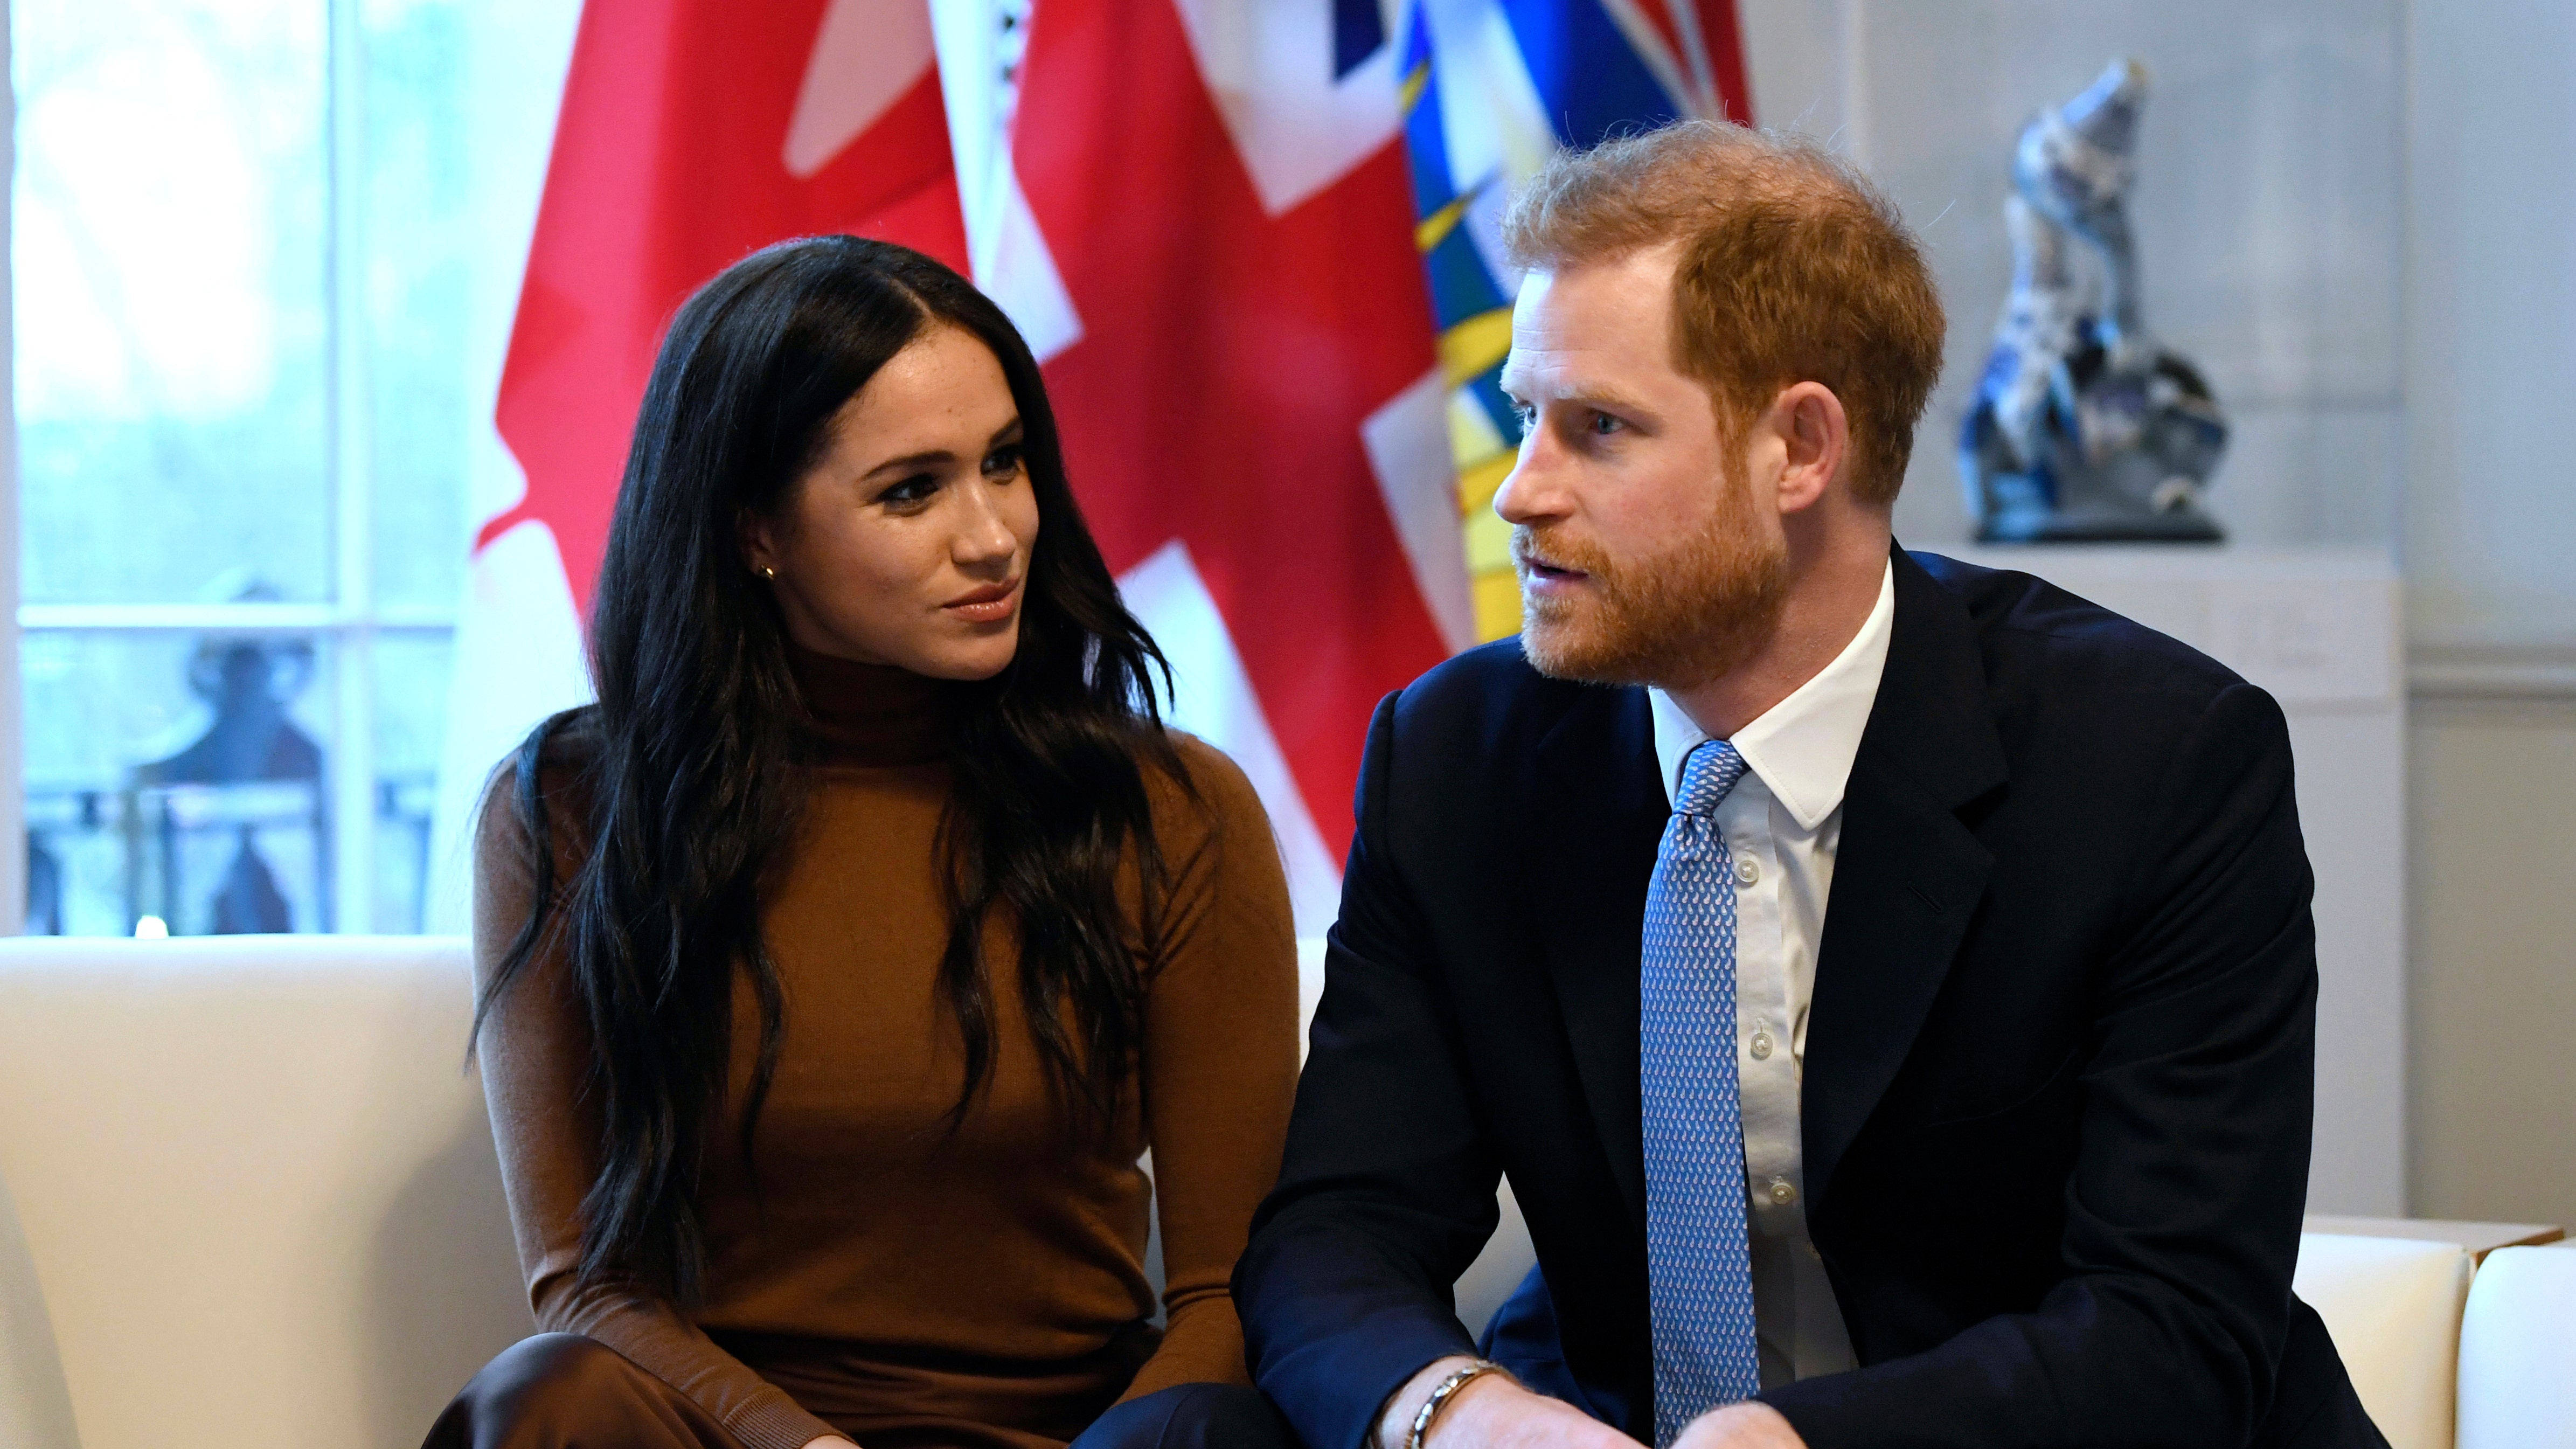 Prince Harry and Meghan Markle face backlash for ‘weird’ Time magazine cover: ‘They look CGI’